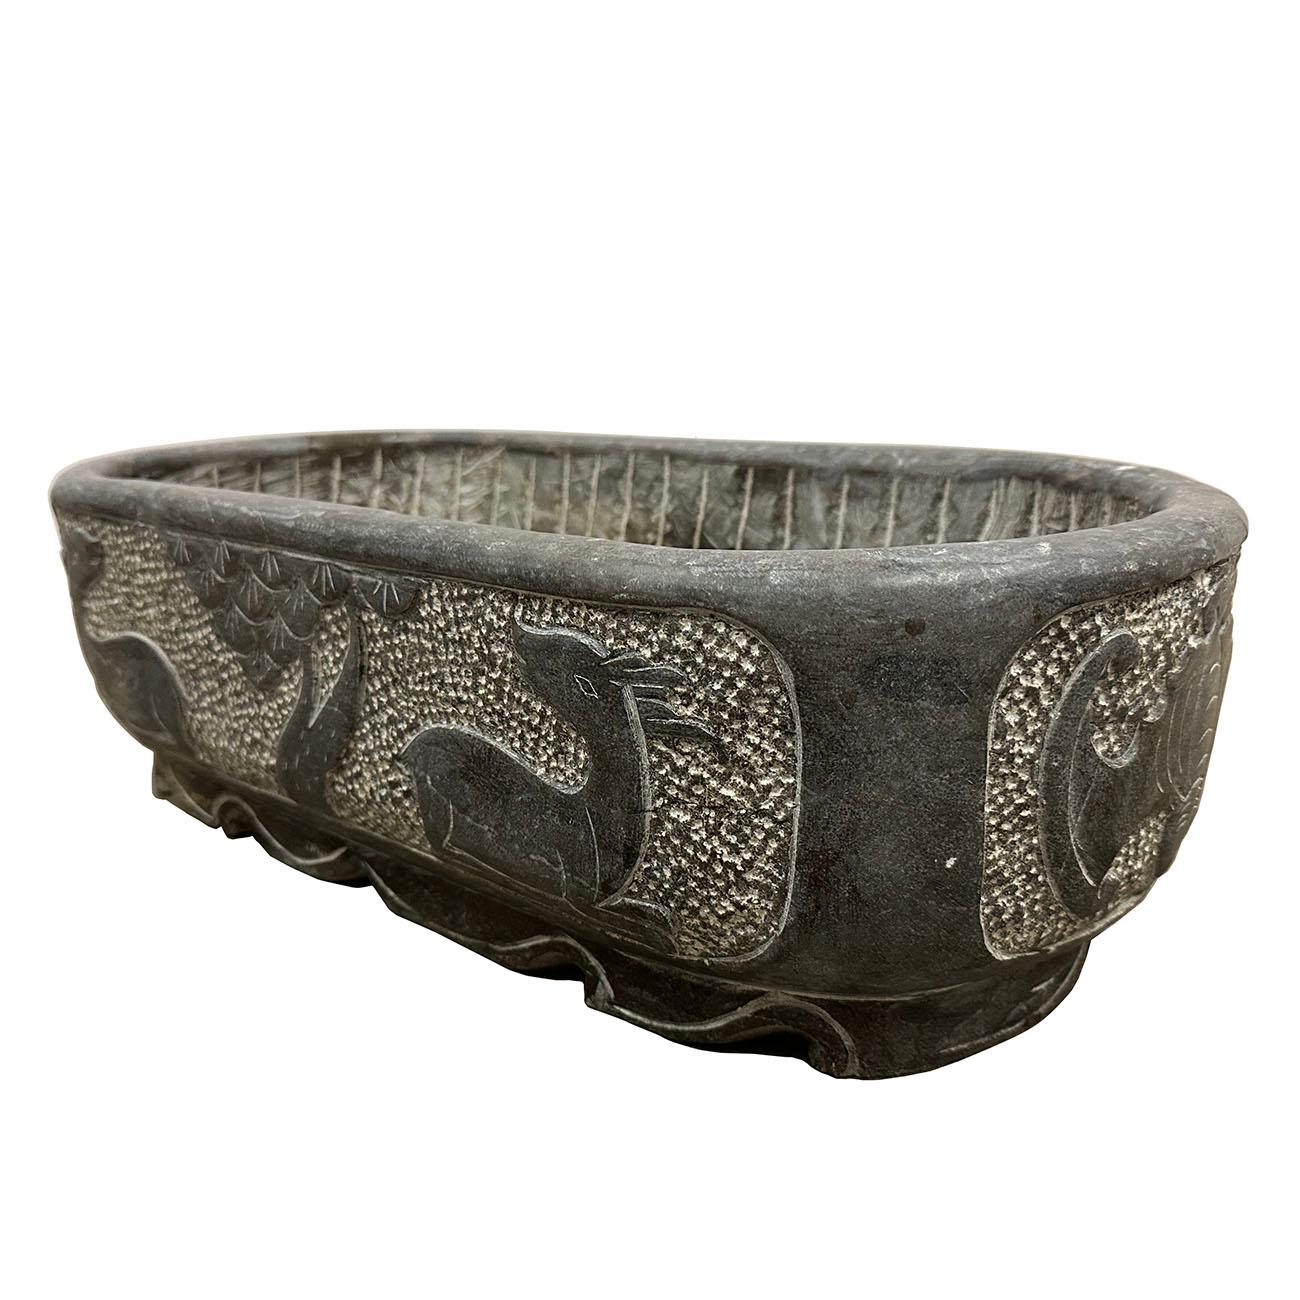 This stone planter is retrieved from the village in northern part of China. It is hand chiseled out of one piece of stone and hand carved by the local stone master. It's originally for feeding chicken, ducks, etc. Now It can be an unique garden